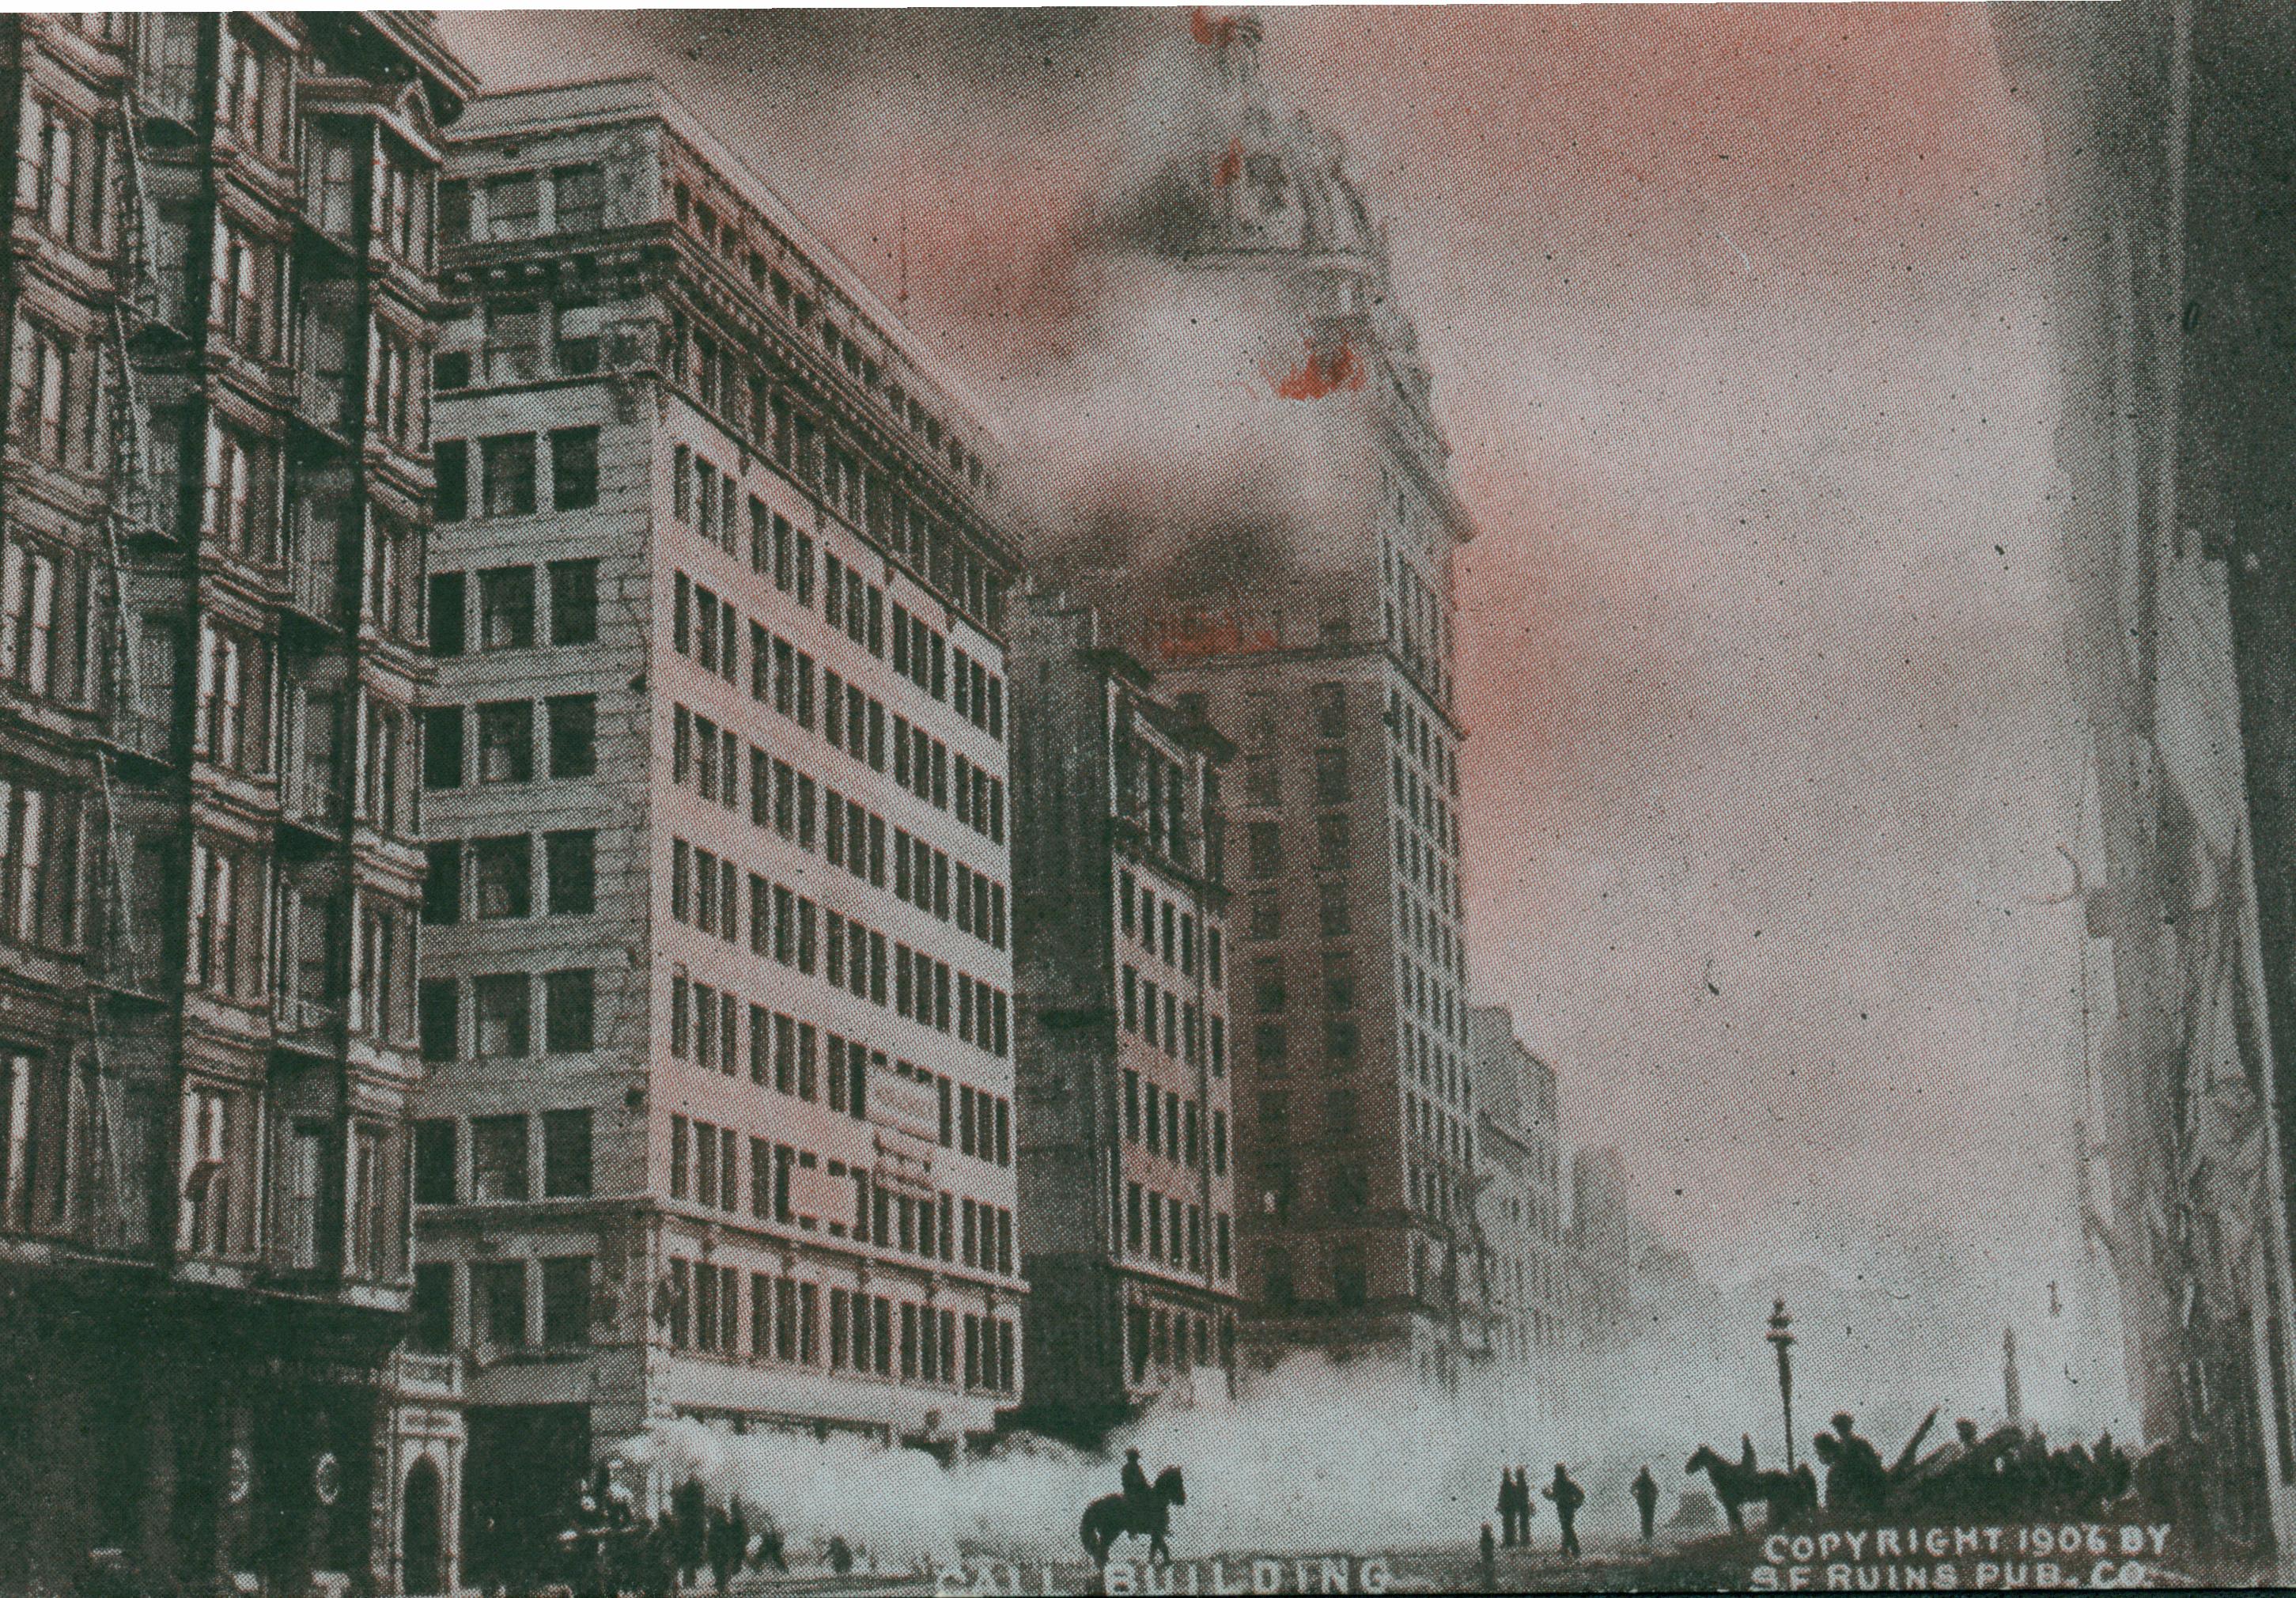 Shows the San Francisco Call building burning